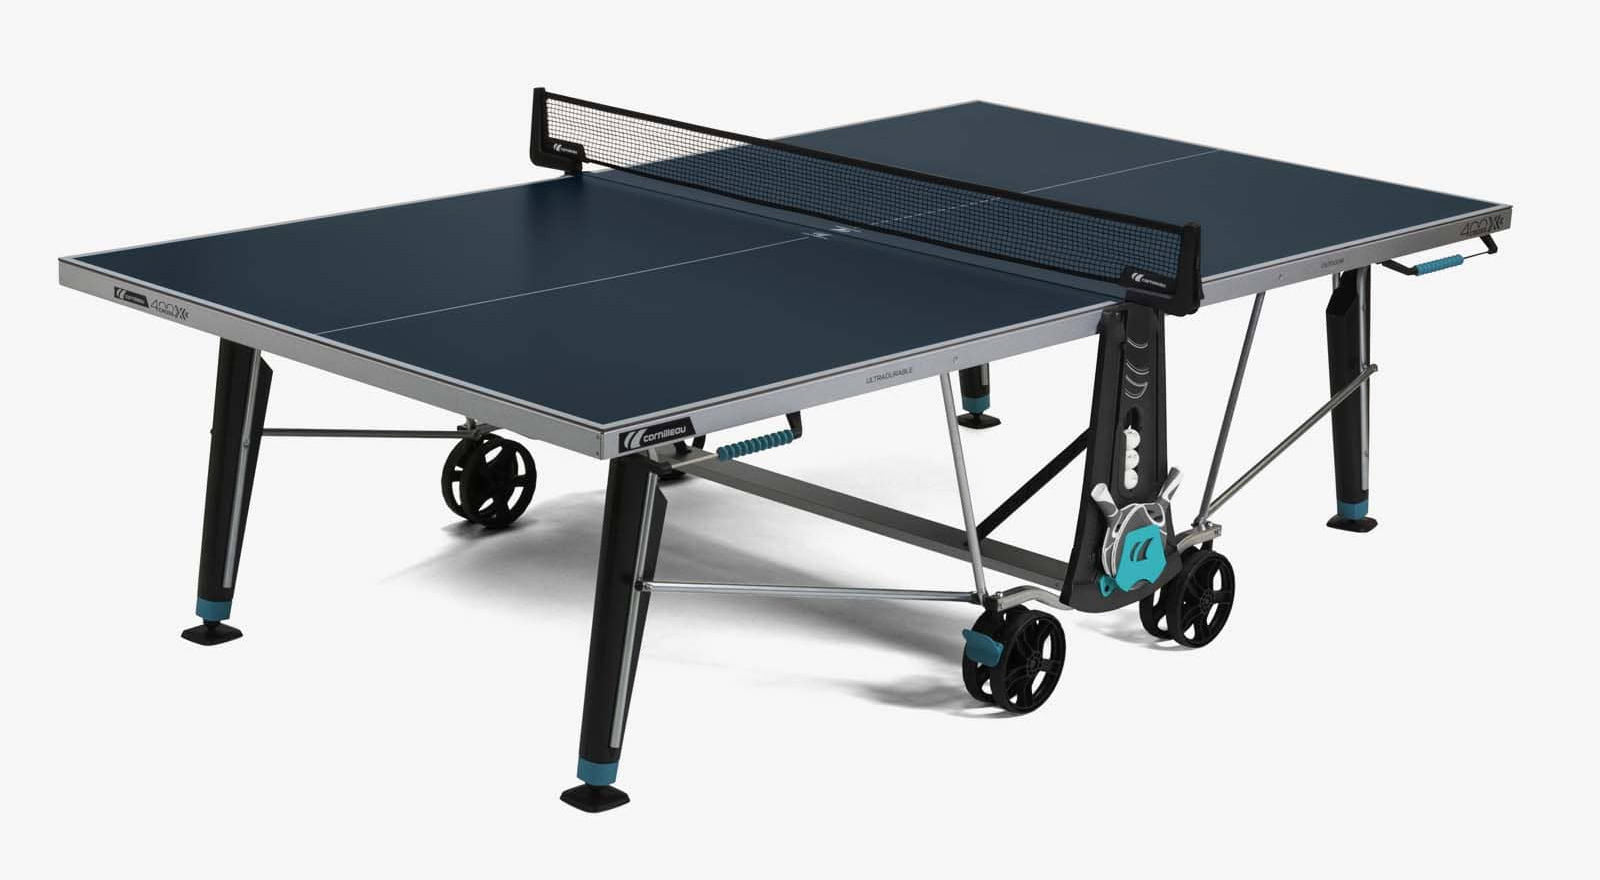 How to learn to play table tennis? - Cornilleau